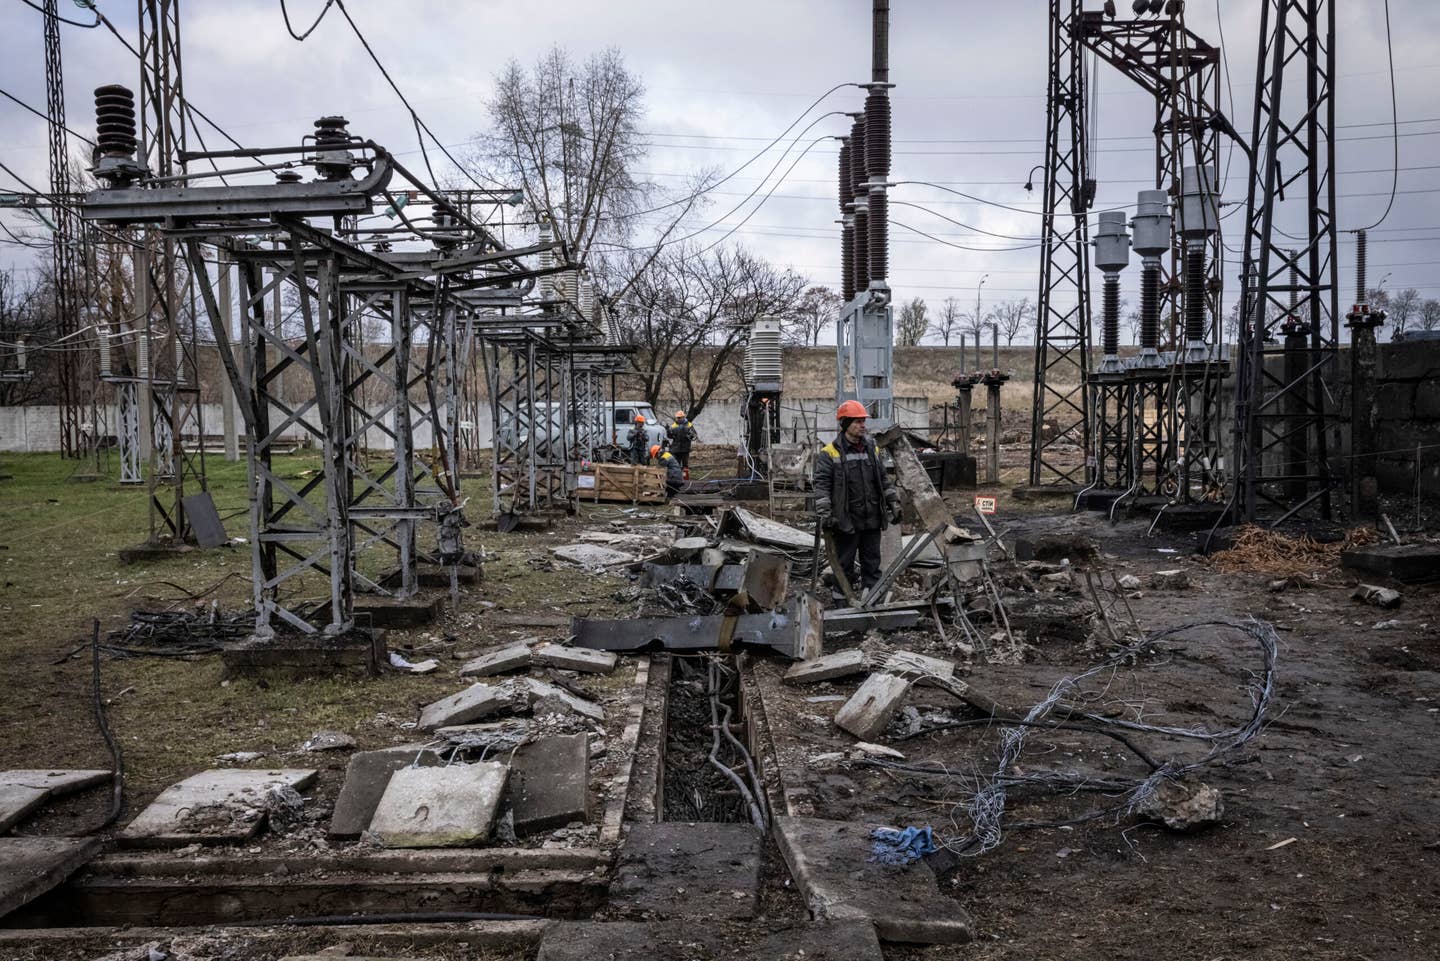 KYIV REGION, UKRAINE - NOVEMBER 04: Workers repair infrastructure in a power station that was damaged by a Russian air attack in October, on November 04, 2022 in Kyiv Oblast, Ukraine. Electricity and heating outages across Ukraine caused by missile and drone strikes to energy infrastructure have added urgency to preparations for winter. (Photo by Ed Ram/Getty Images)